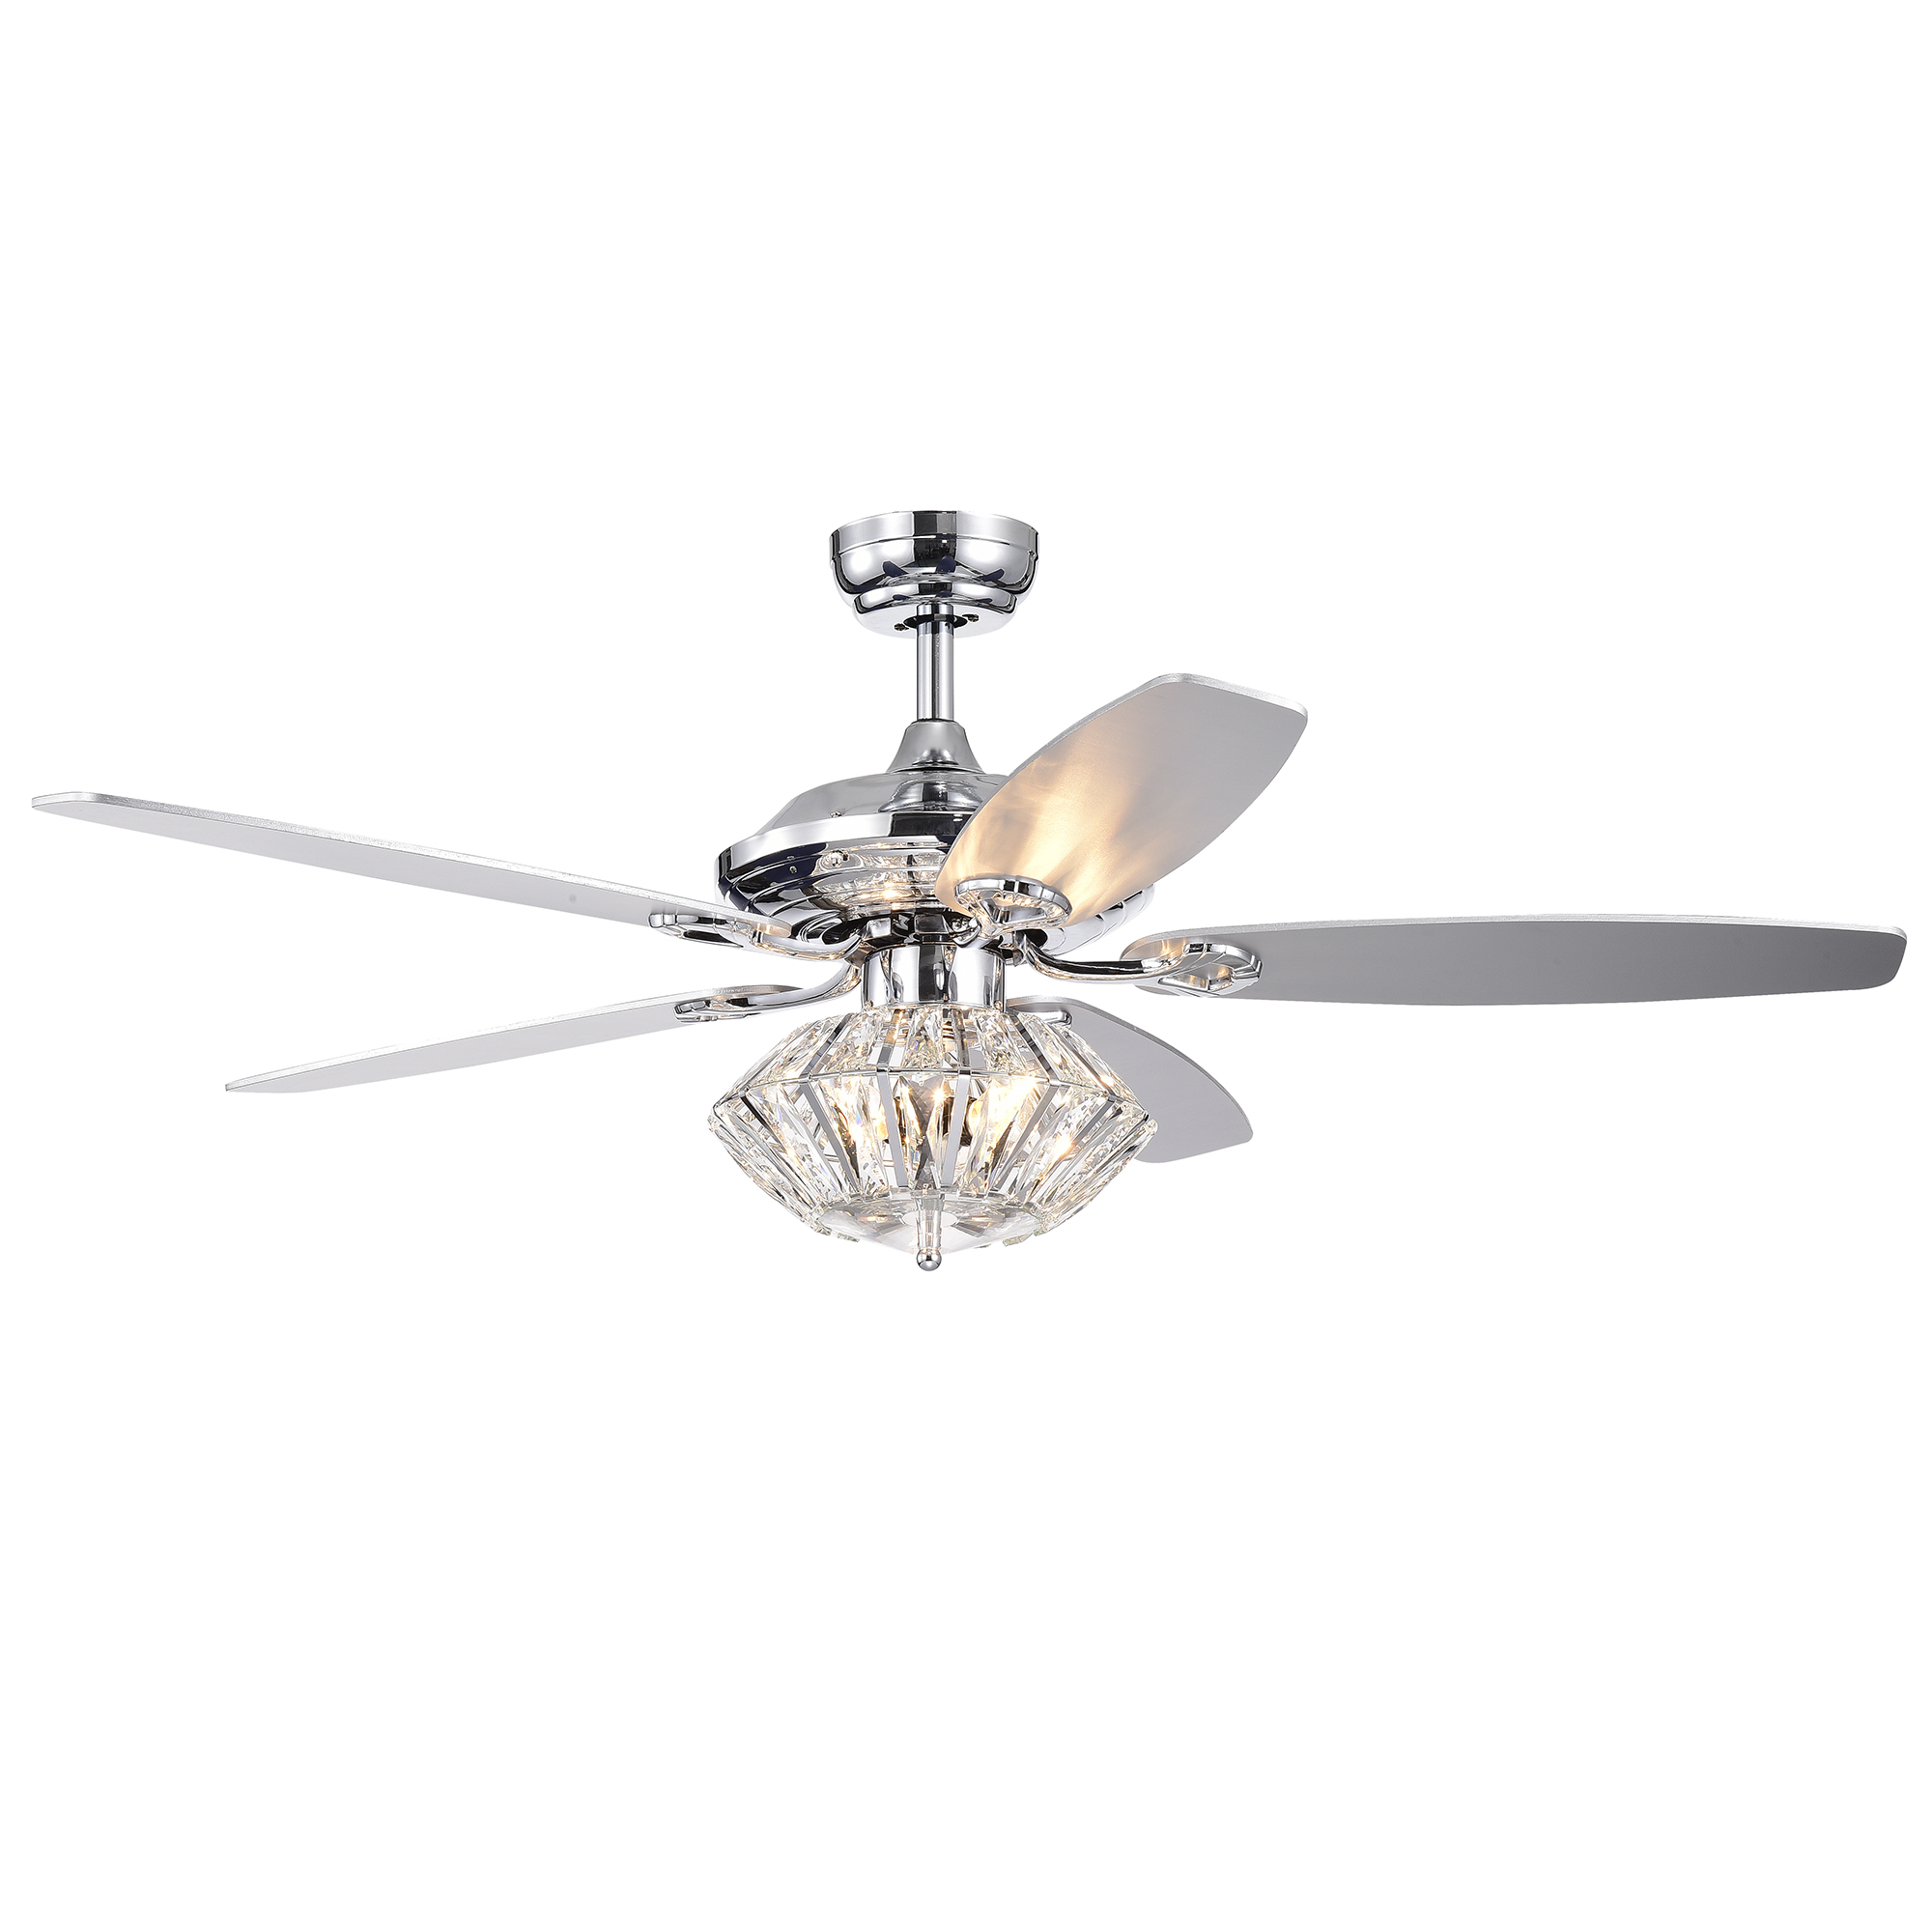 Makore Chrome 52-inch Lighted Ceiling Fan with Crystal Shade (incl. Remote & 2 Color Option Blades)